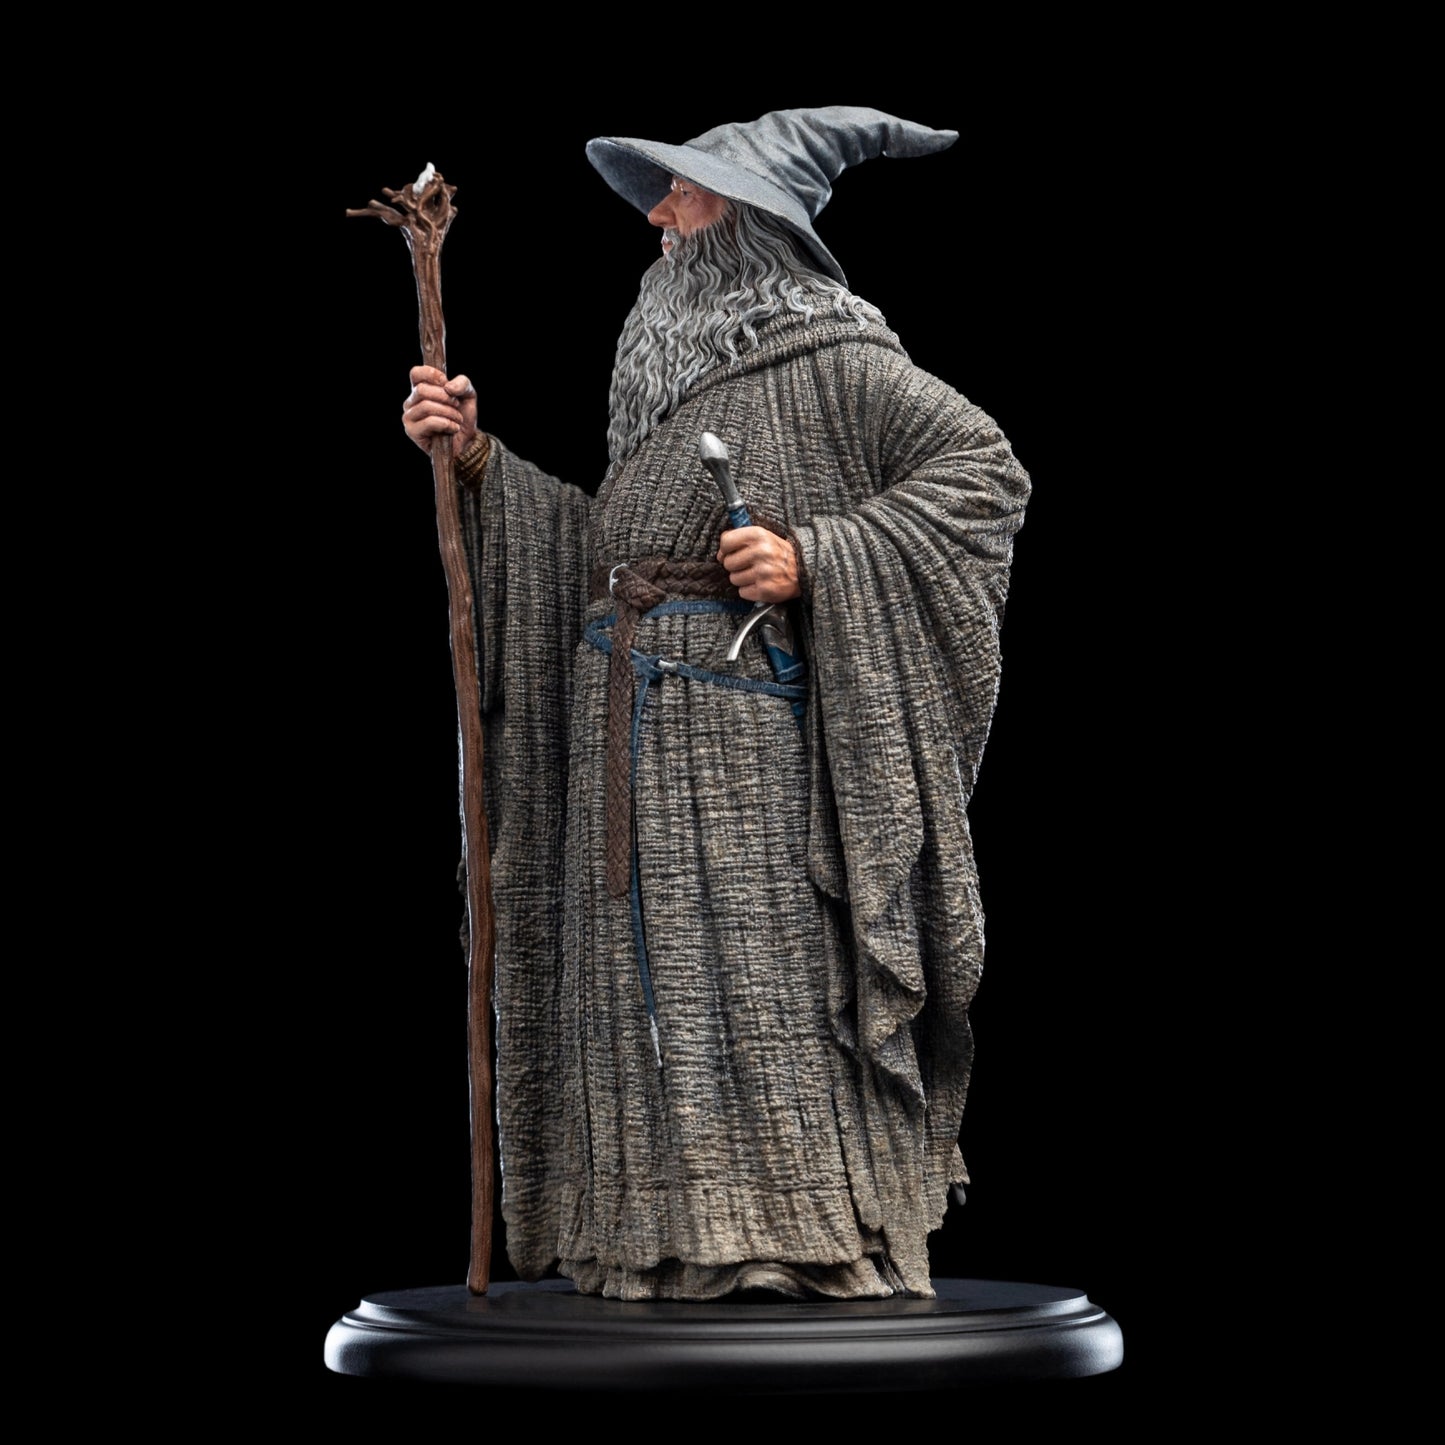 Gandalf the Grey Wizard (The Lord of the Rings) Miniature Statue